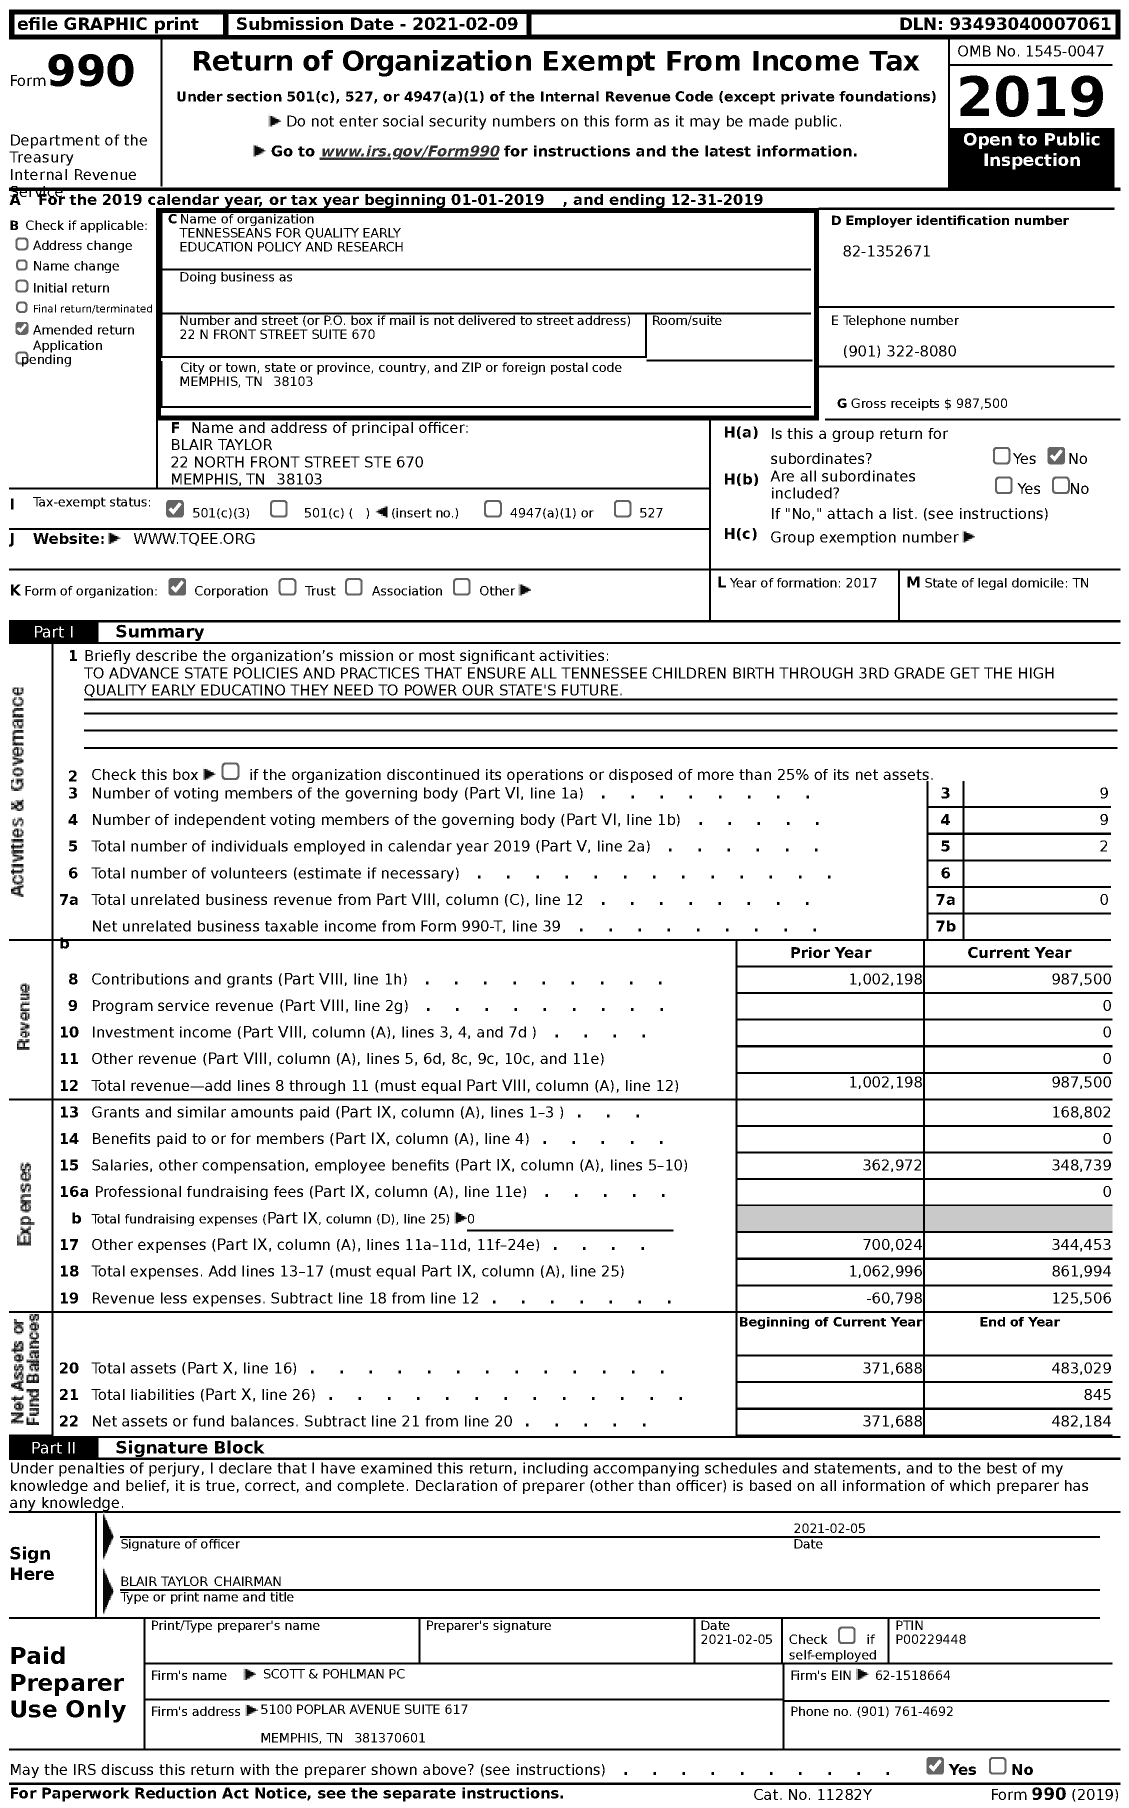 Image of first page of 2019 Form 990 for Tennesseans for Quality Early Education Policy and Research